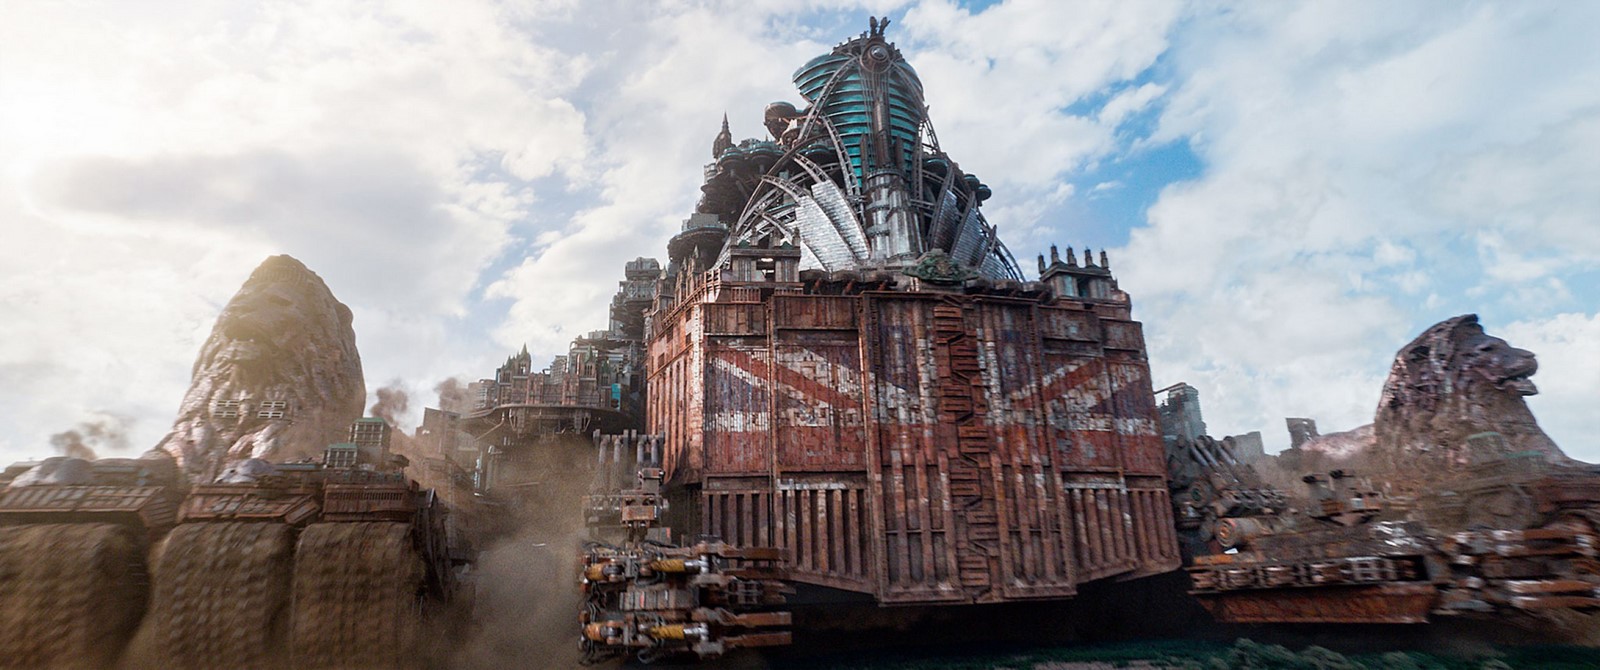 An Architectural review of The Moving Cities of Mortal Engines - Sheet4